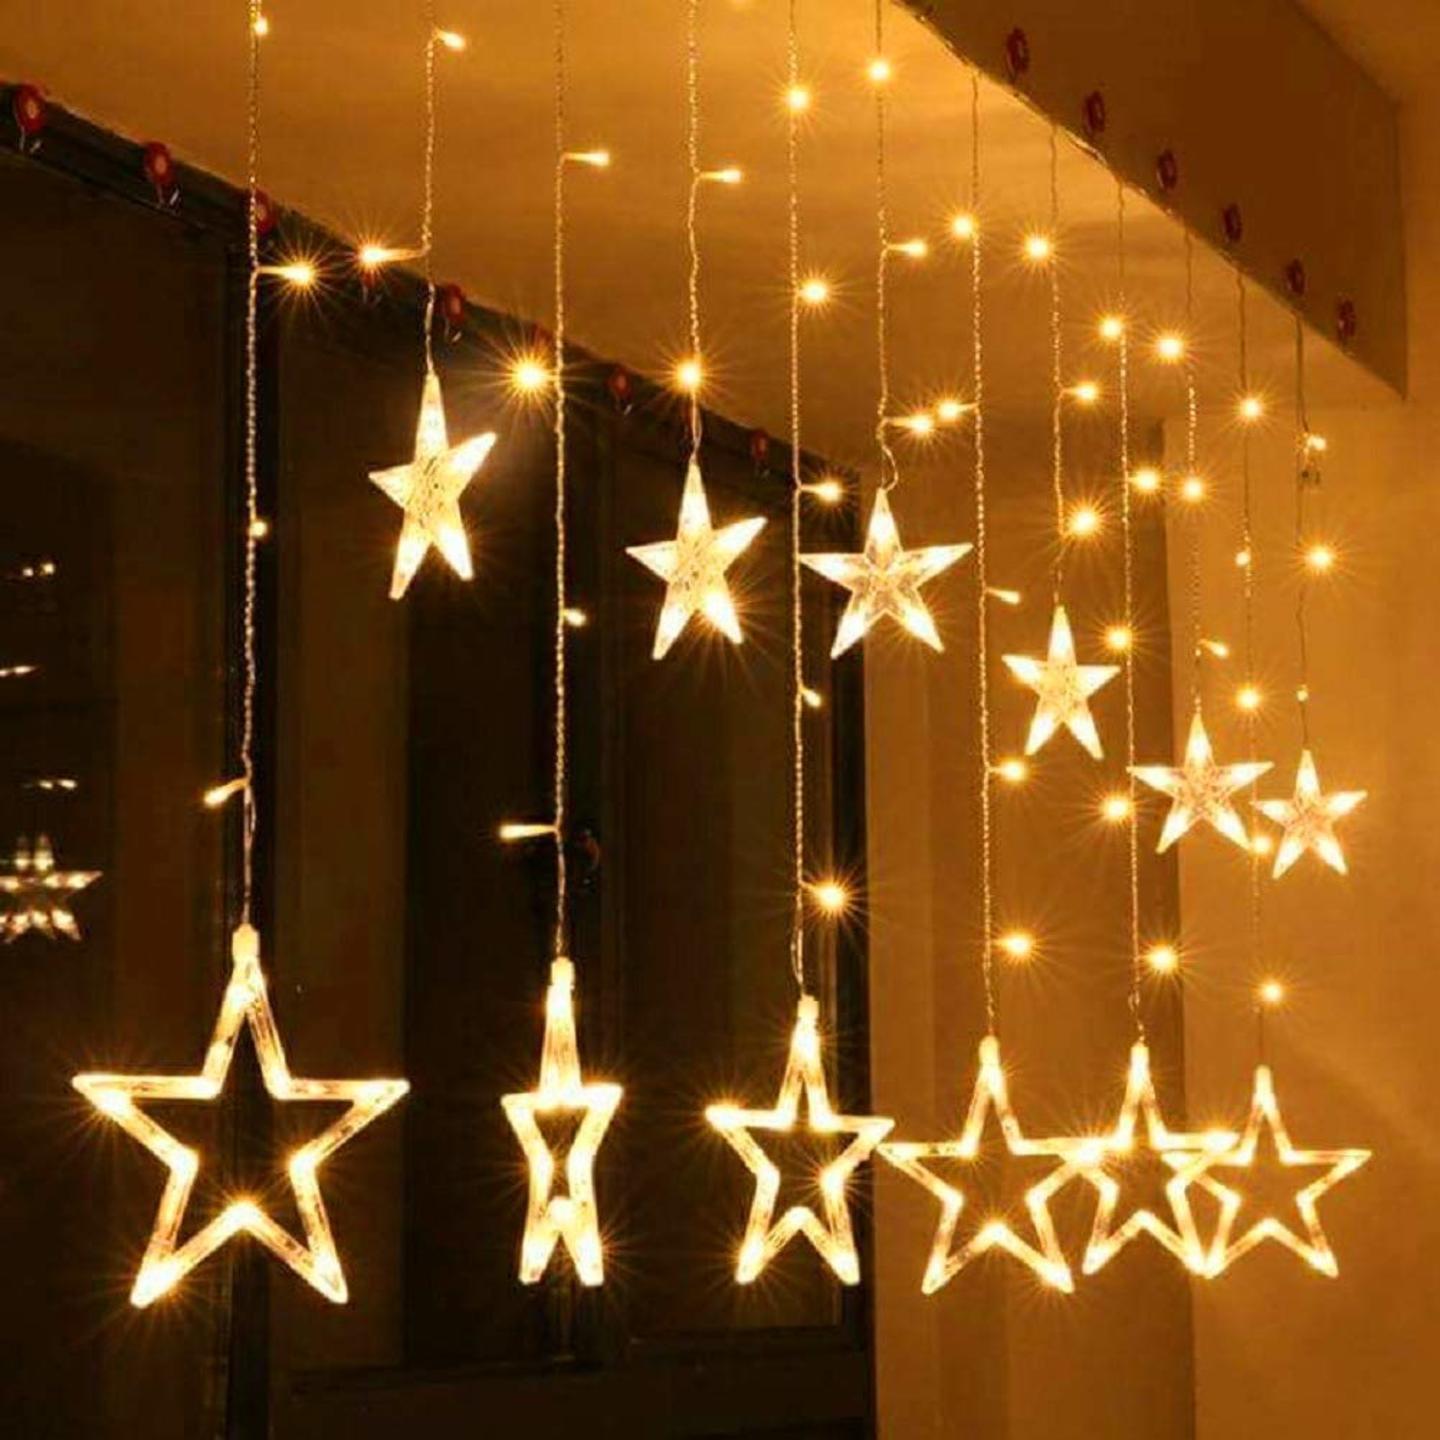 LED Curtain String Lights With FlashingBlinking Modes